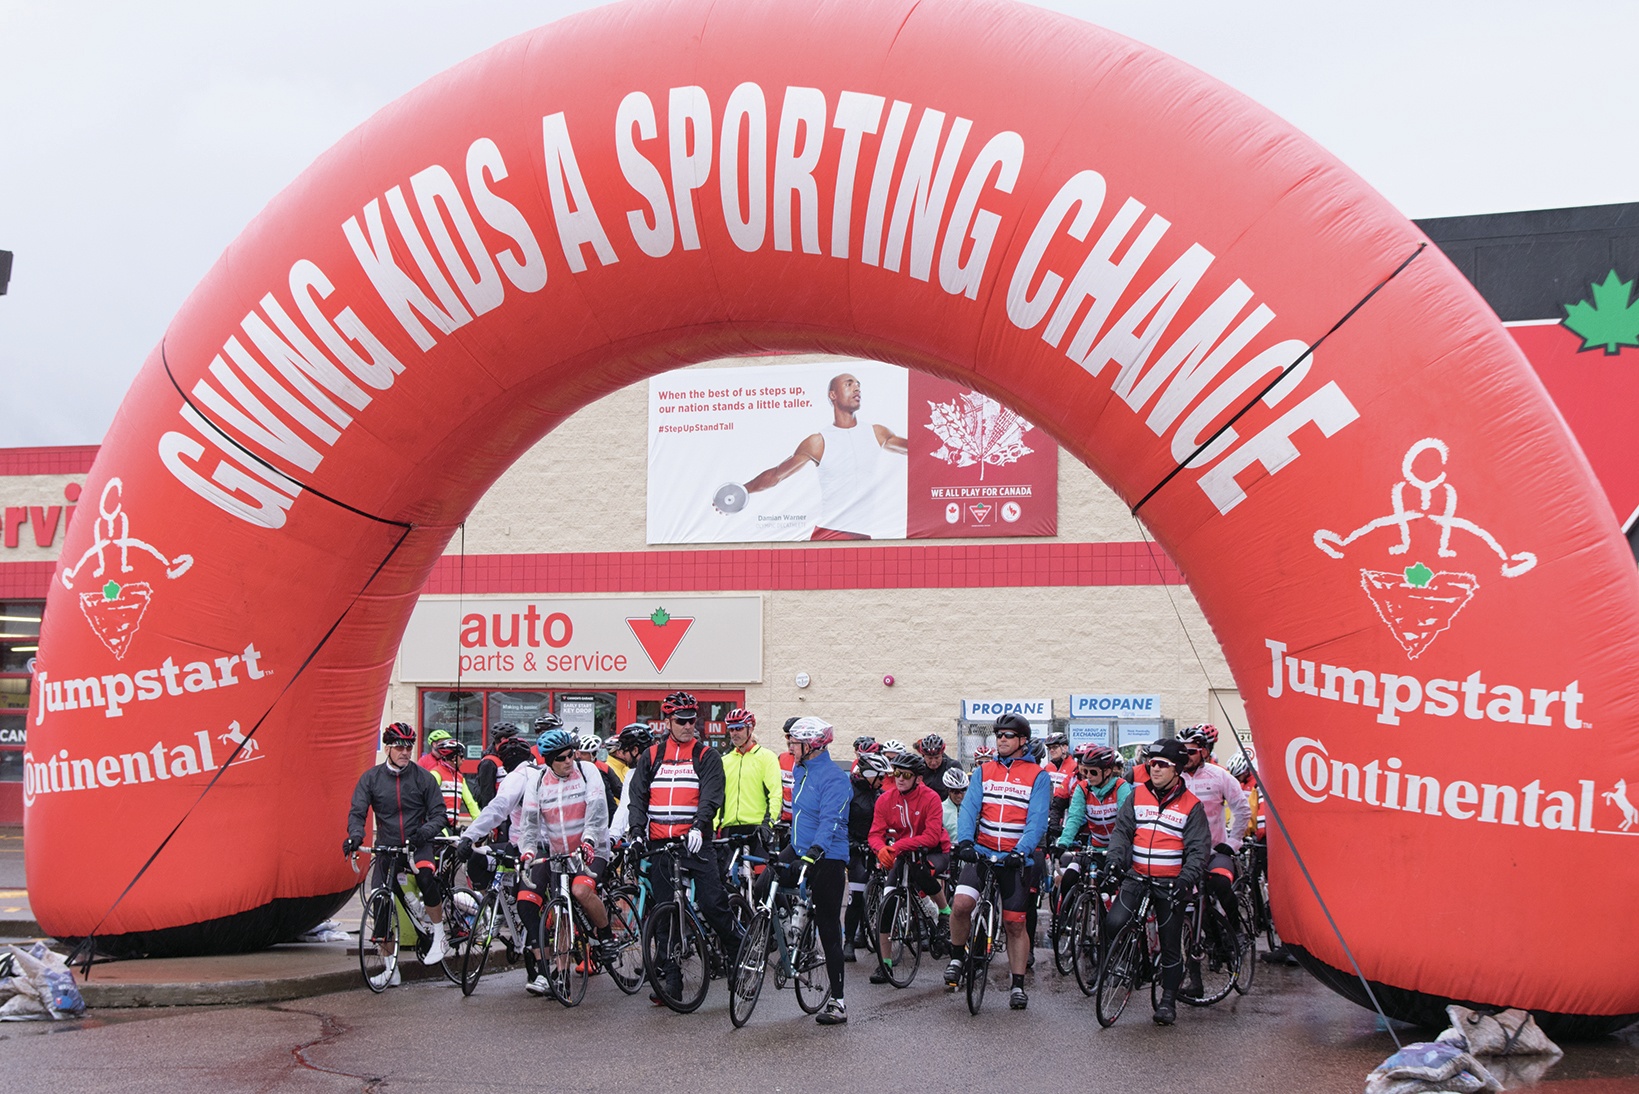 FOR A CAUSE - Cyclers took off on a 500 km ride from Red Deer this morning in support of Canadian Tire's Jumpstart program.